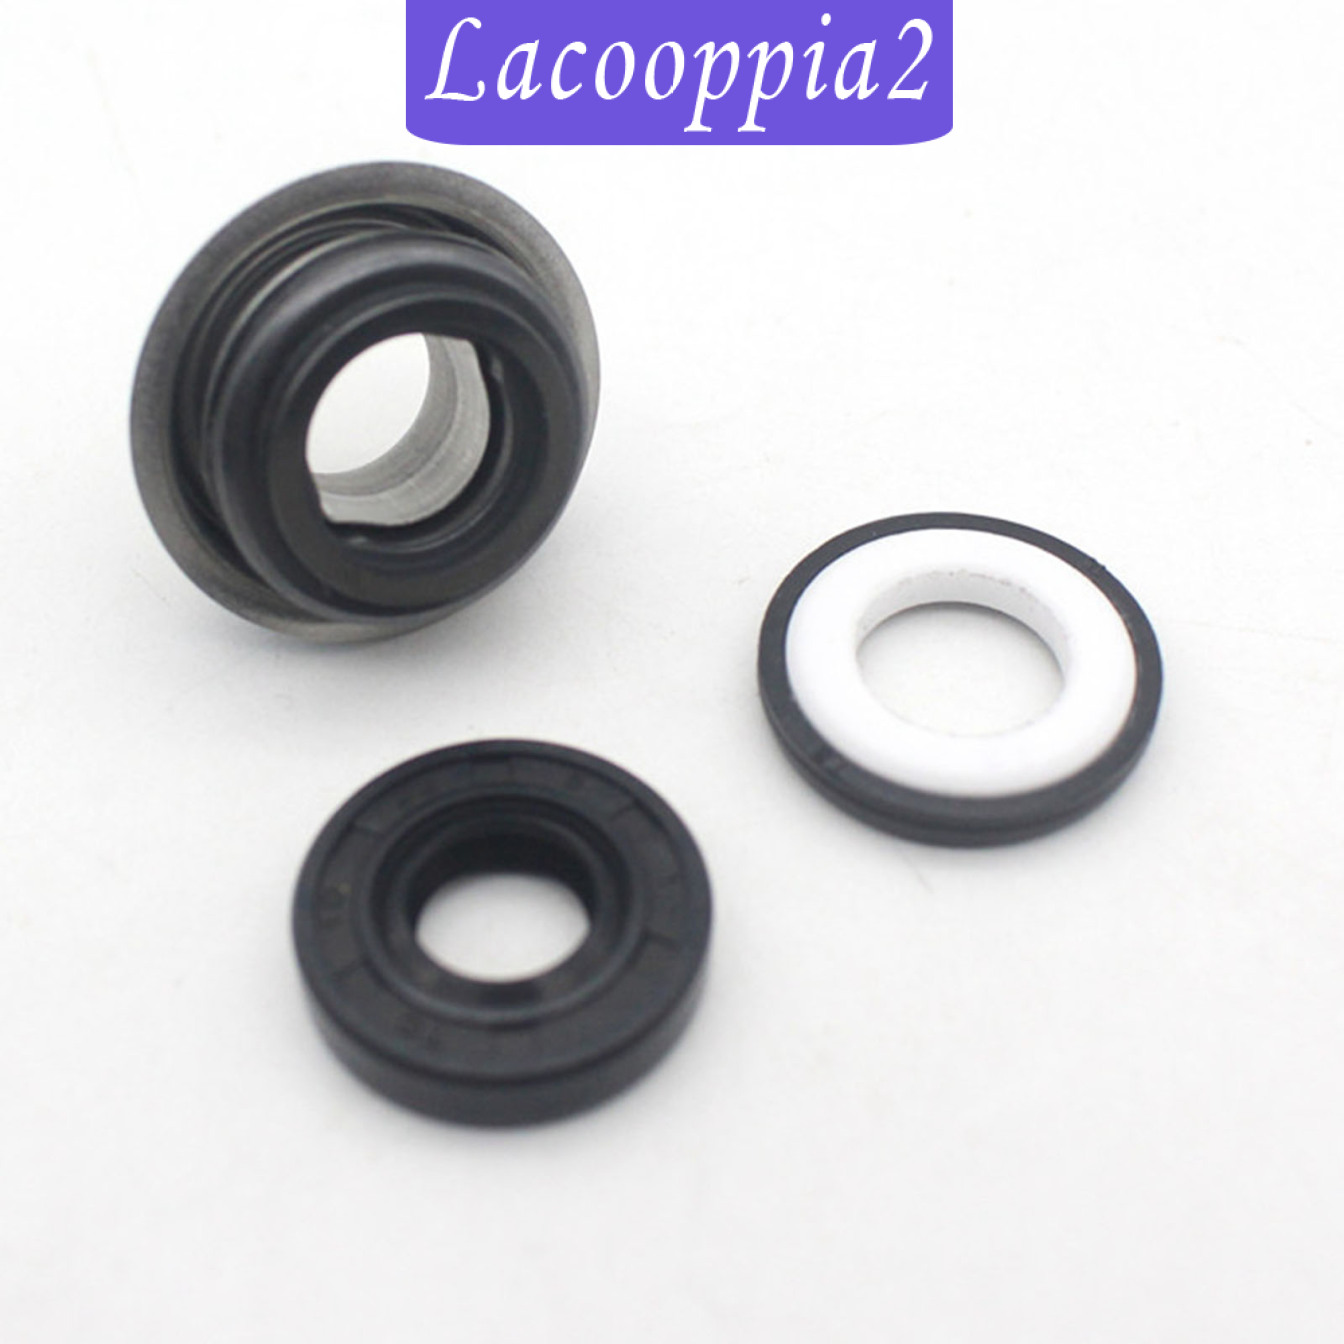 [LACOOPPIA2]3Pieces Water Pump Seal Set Replaces for Suzuki GSXR400 GK76A 1990-1995